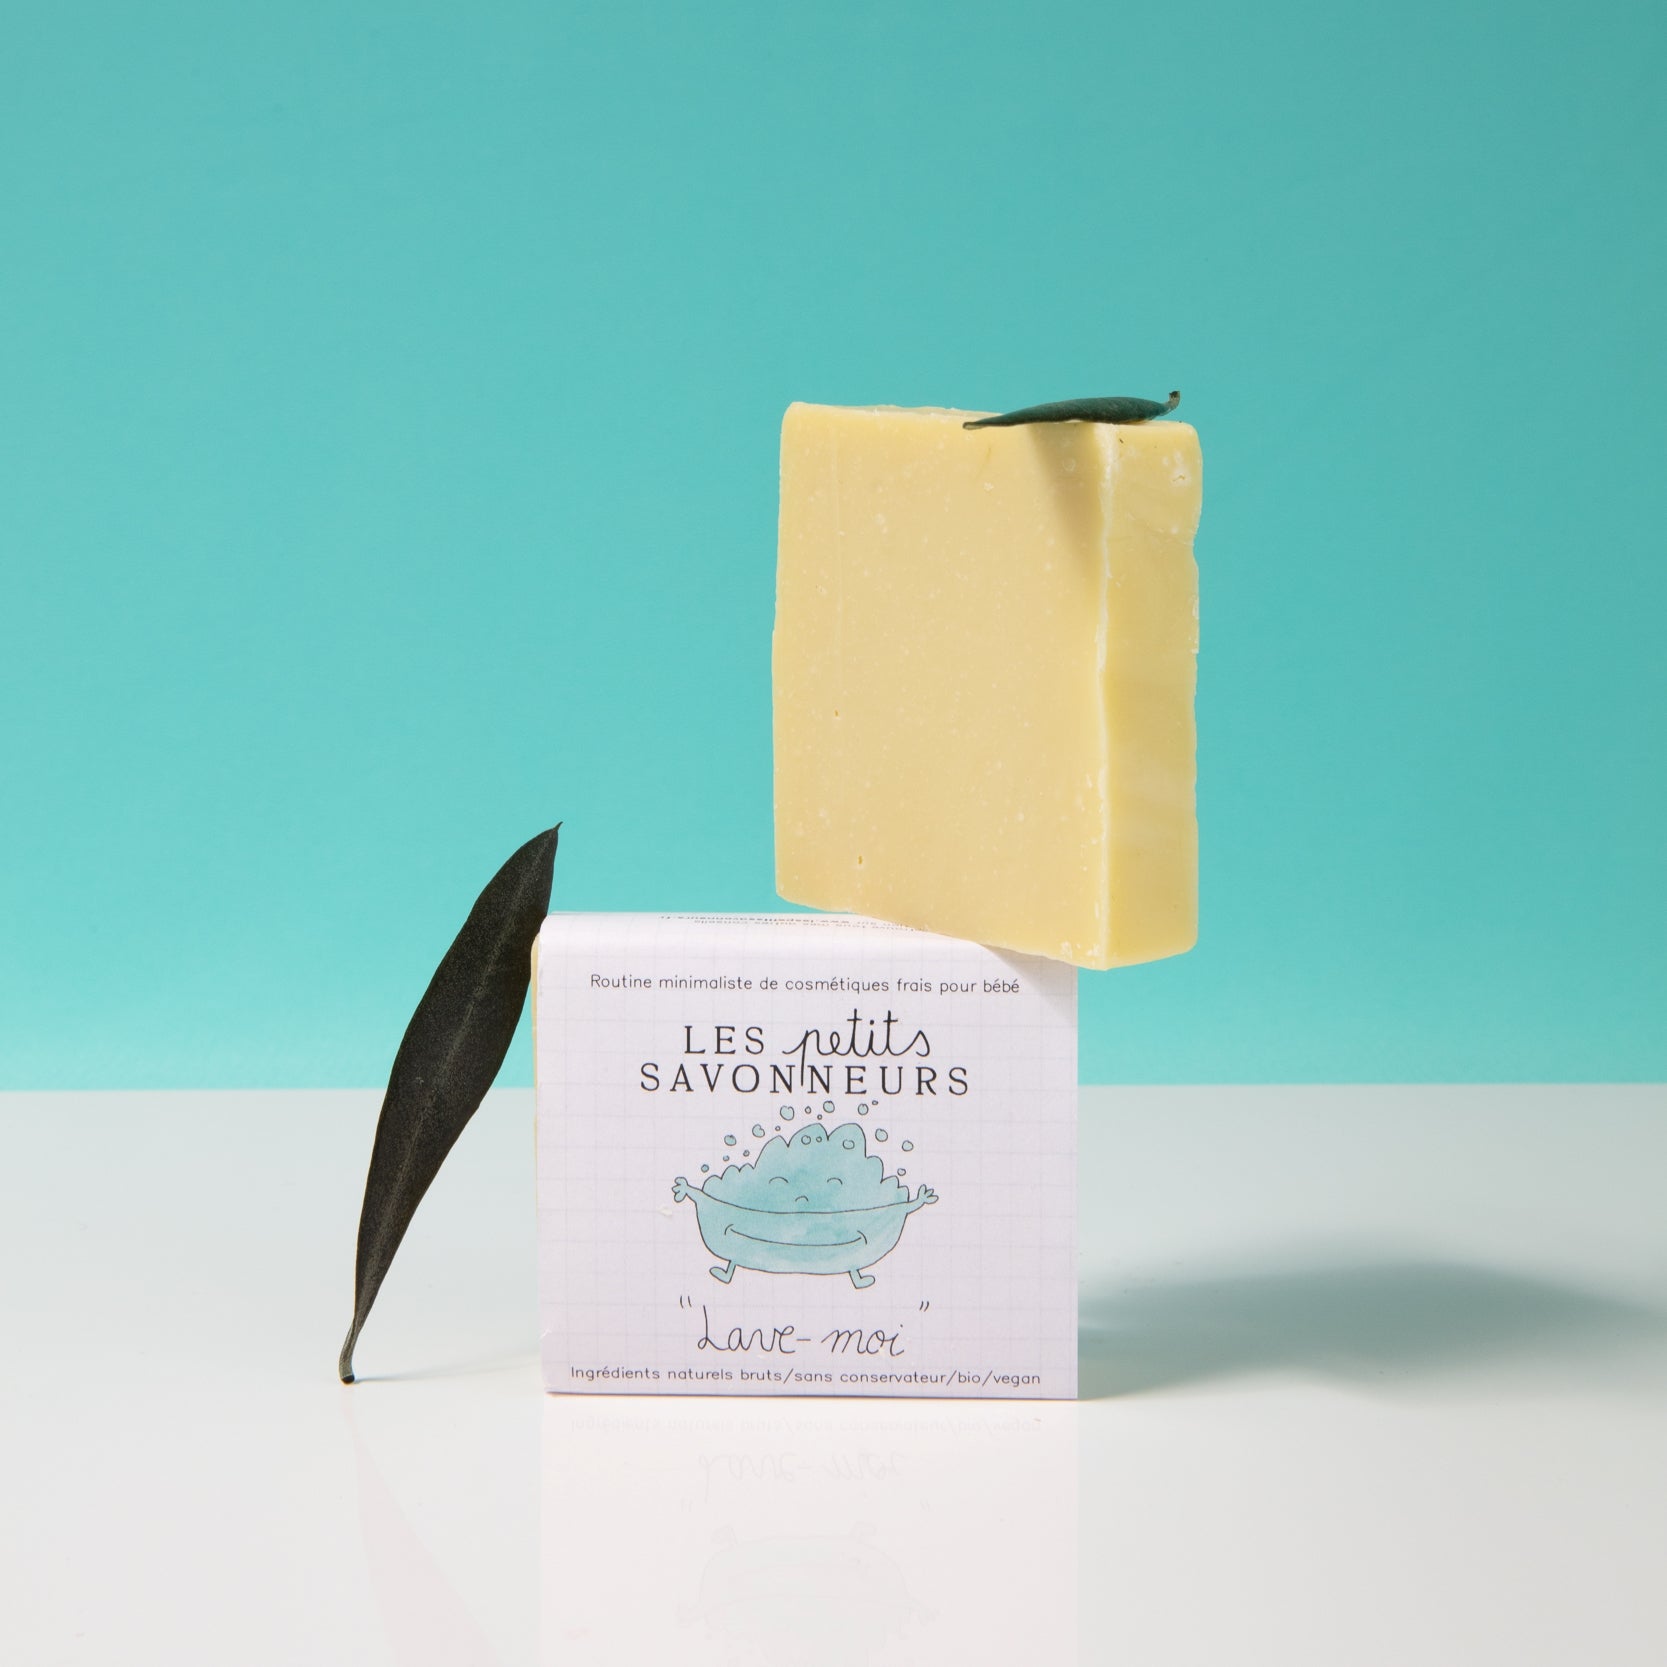 "Wash me": surgras body, face and scalp soap